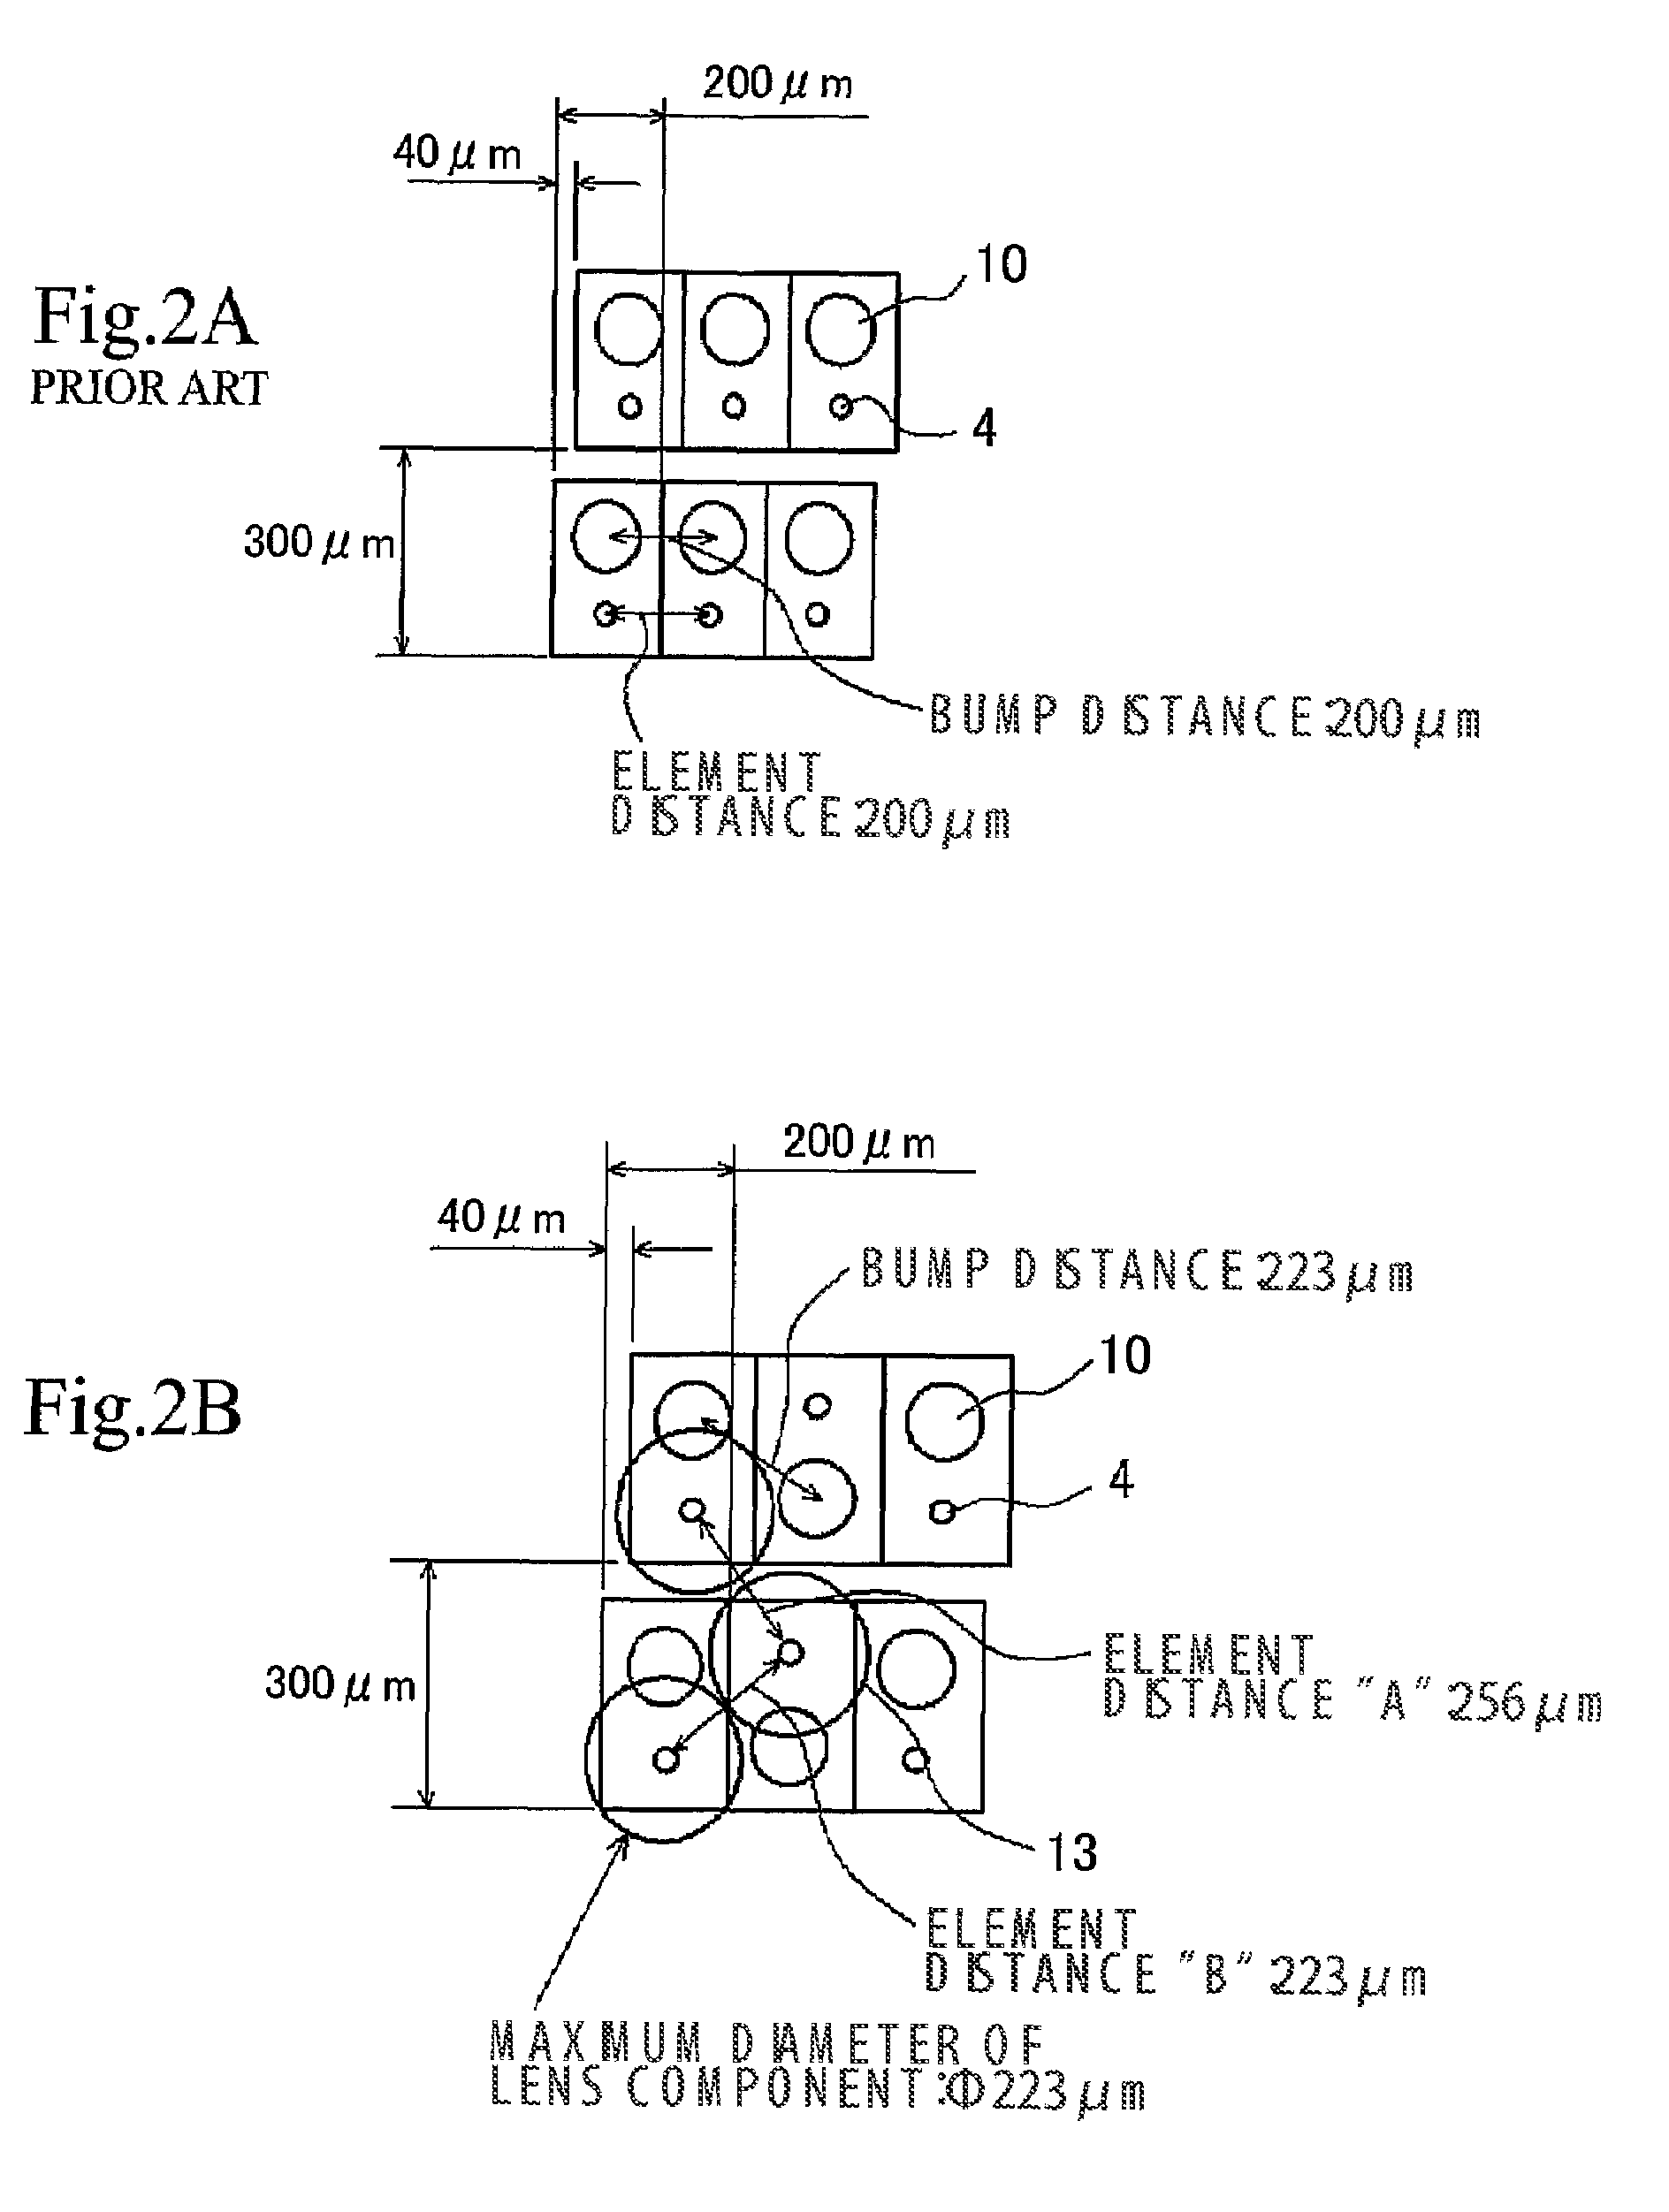 Photo-electric conversion apparatus with alternating photoelectric conversion elements